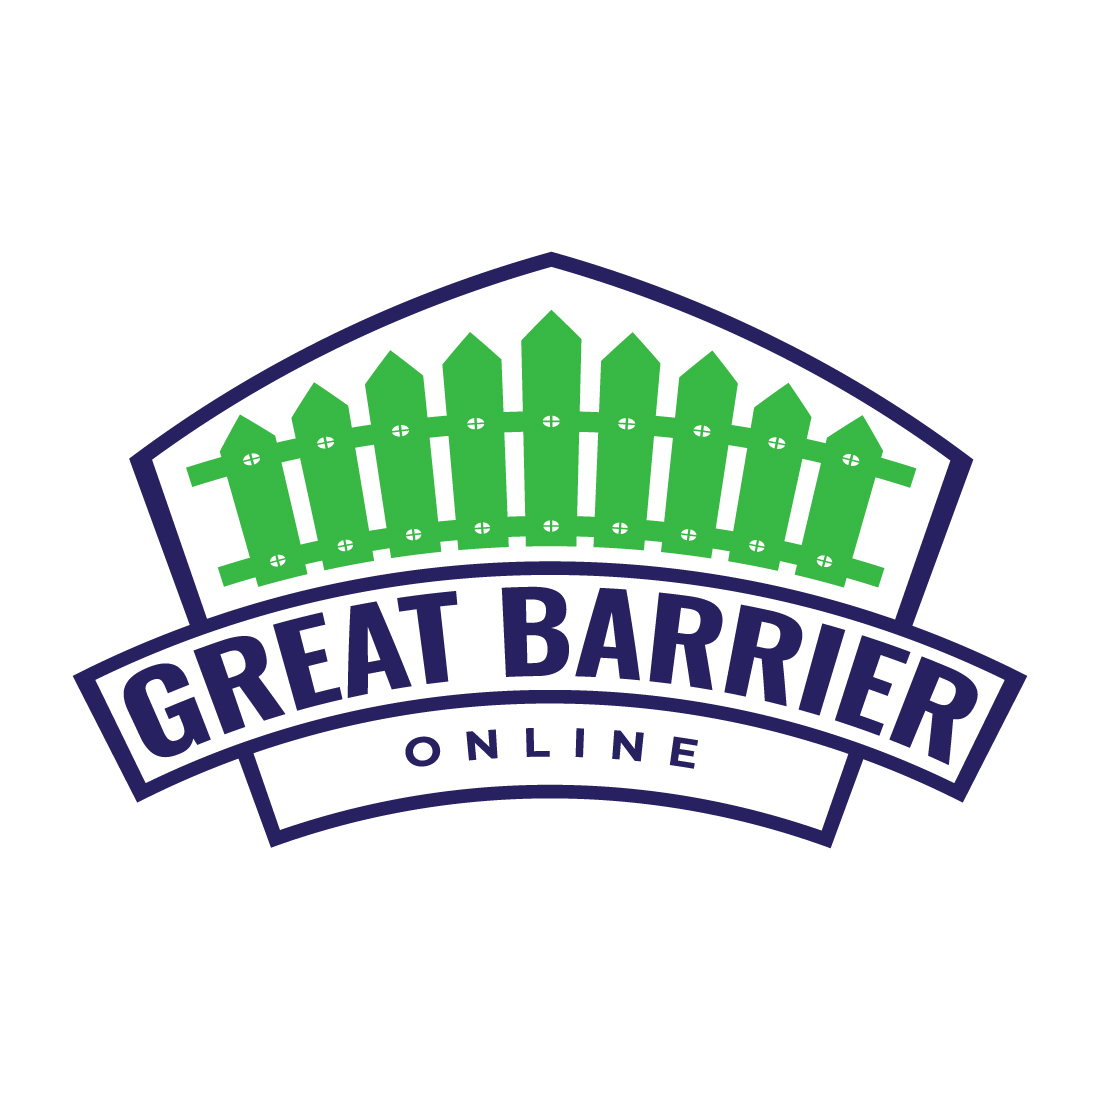 Great Barrier Logo design for your brand preview image.